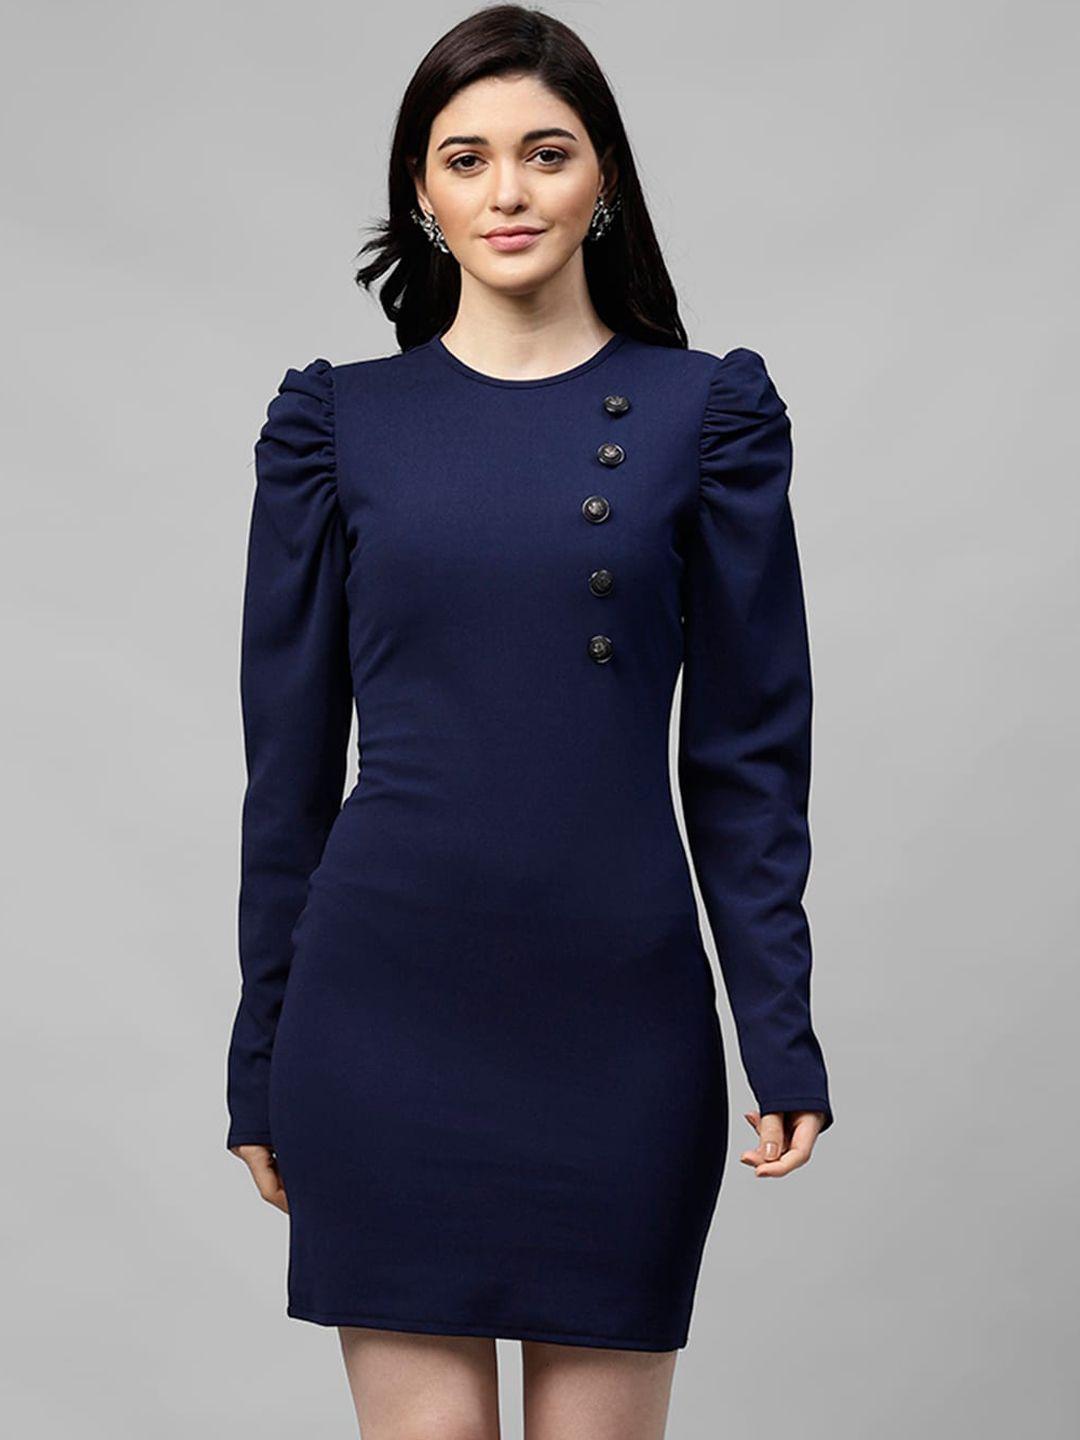 athena women navy blue solid sheath dress with puff sleeves